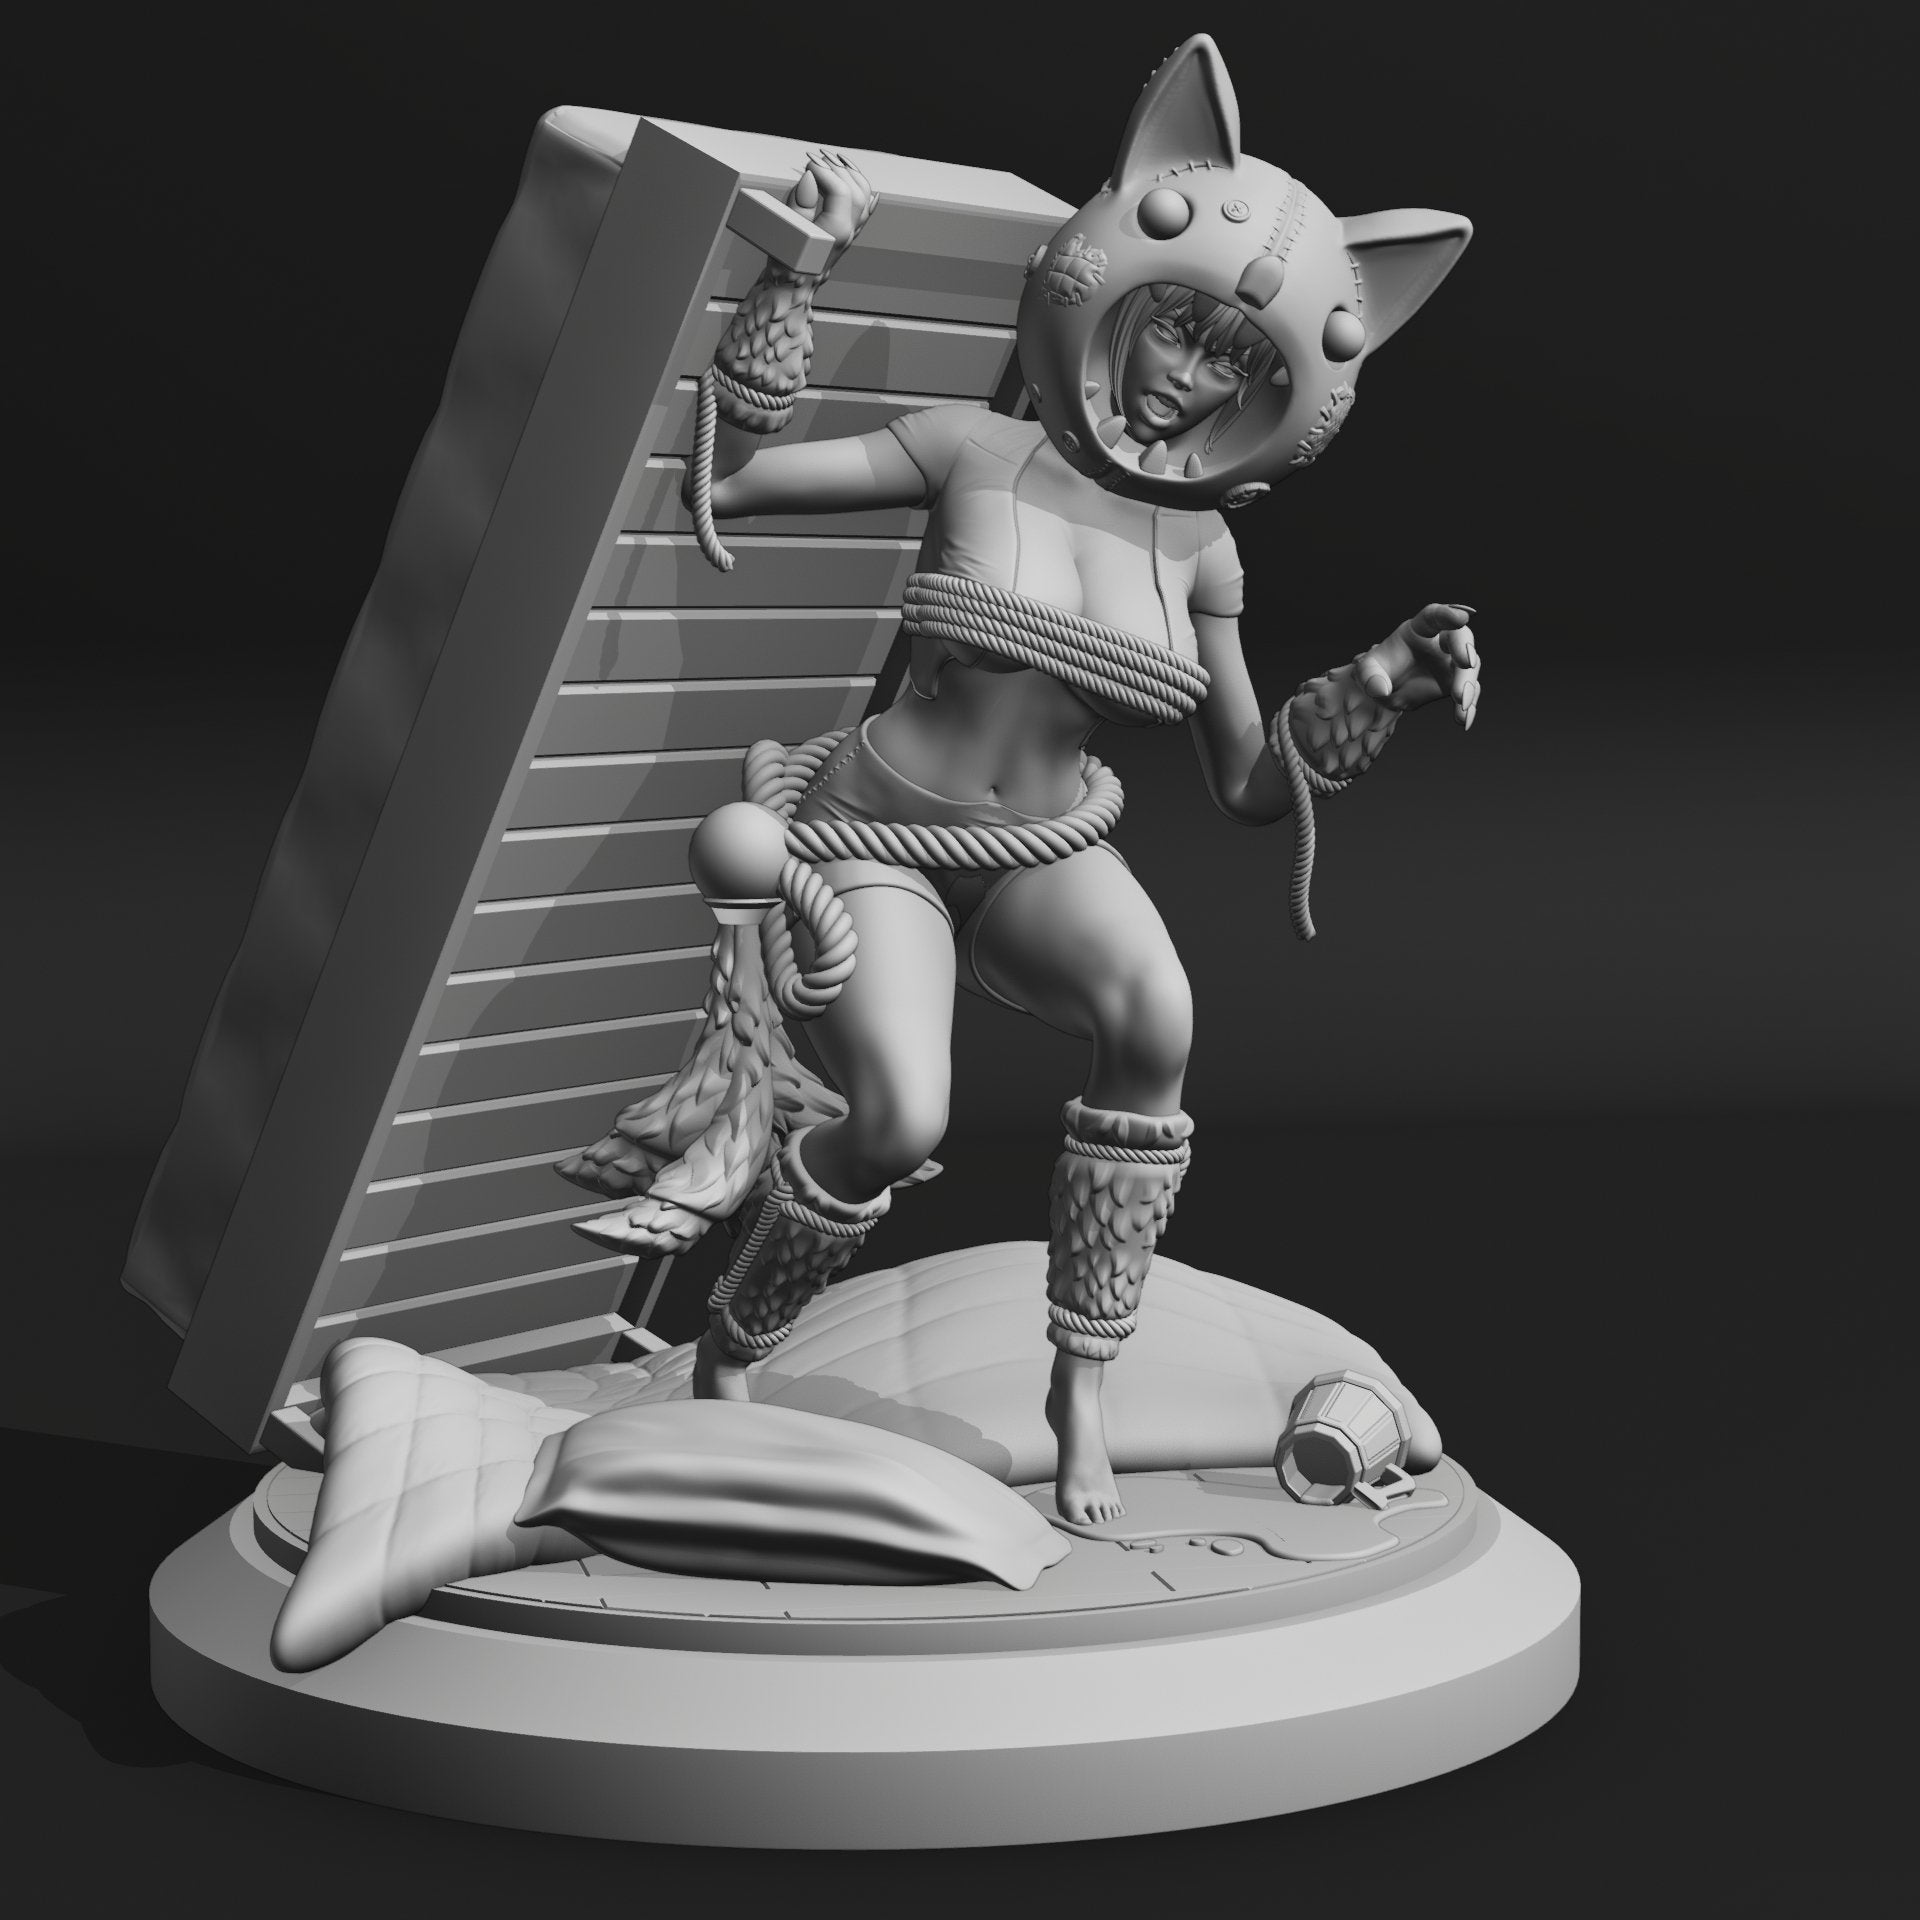 Bed Monster 3d Printed miniature FanArt by QB works Scaled Collectables Statues & Figurines